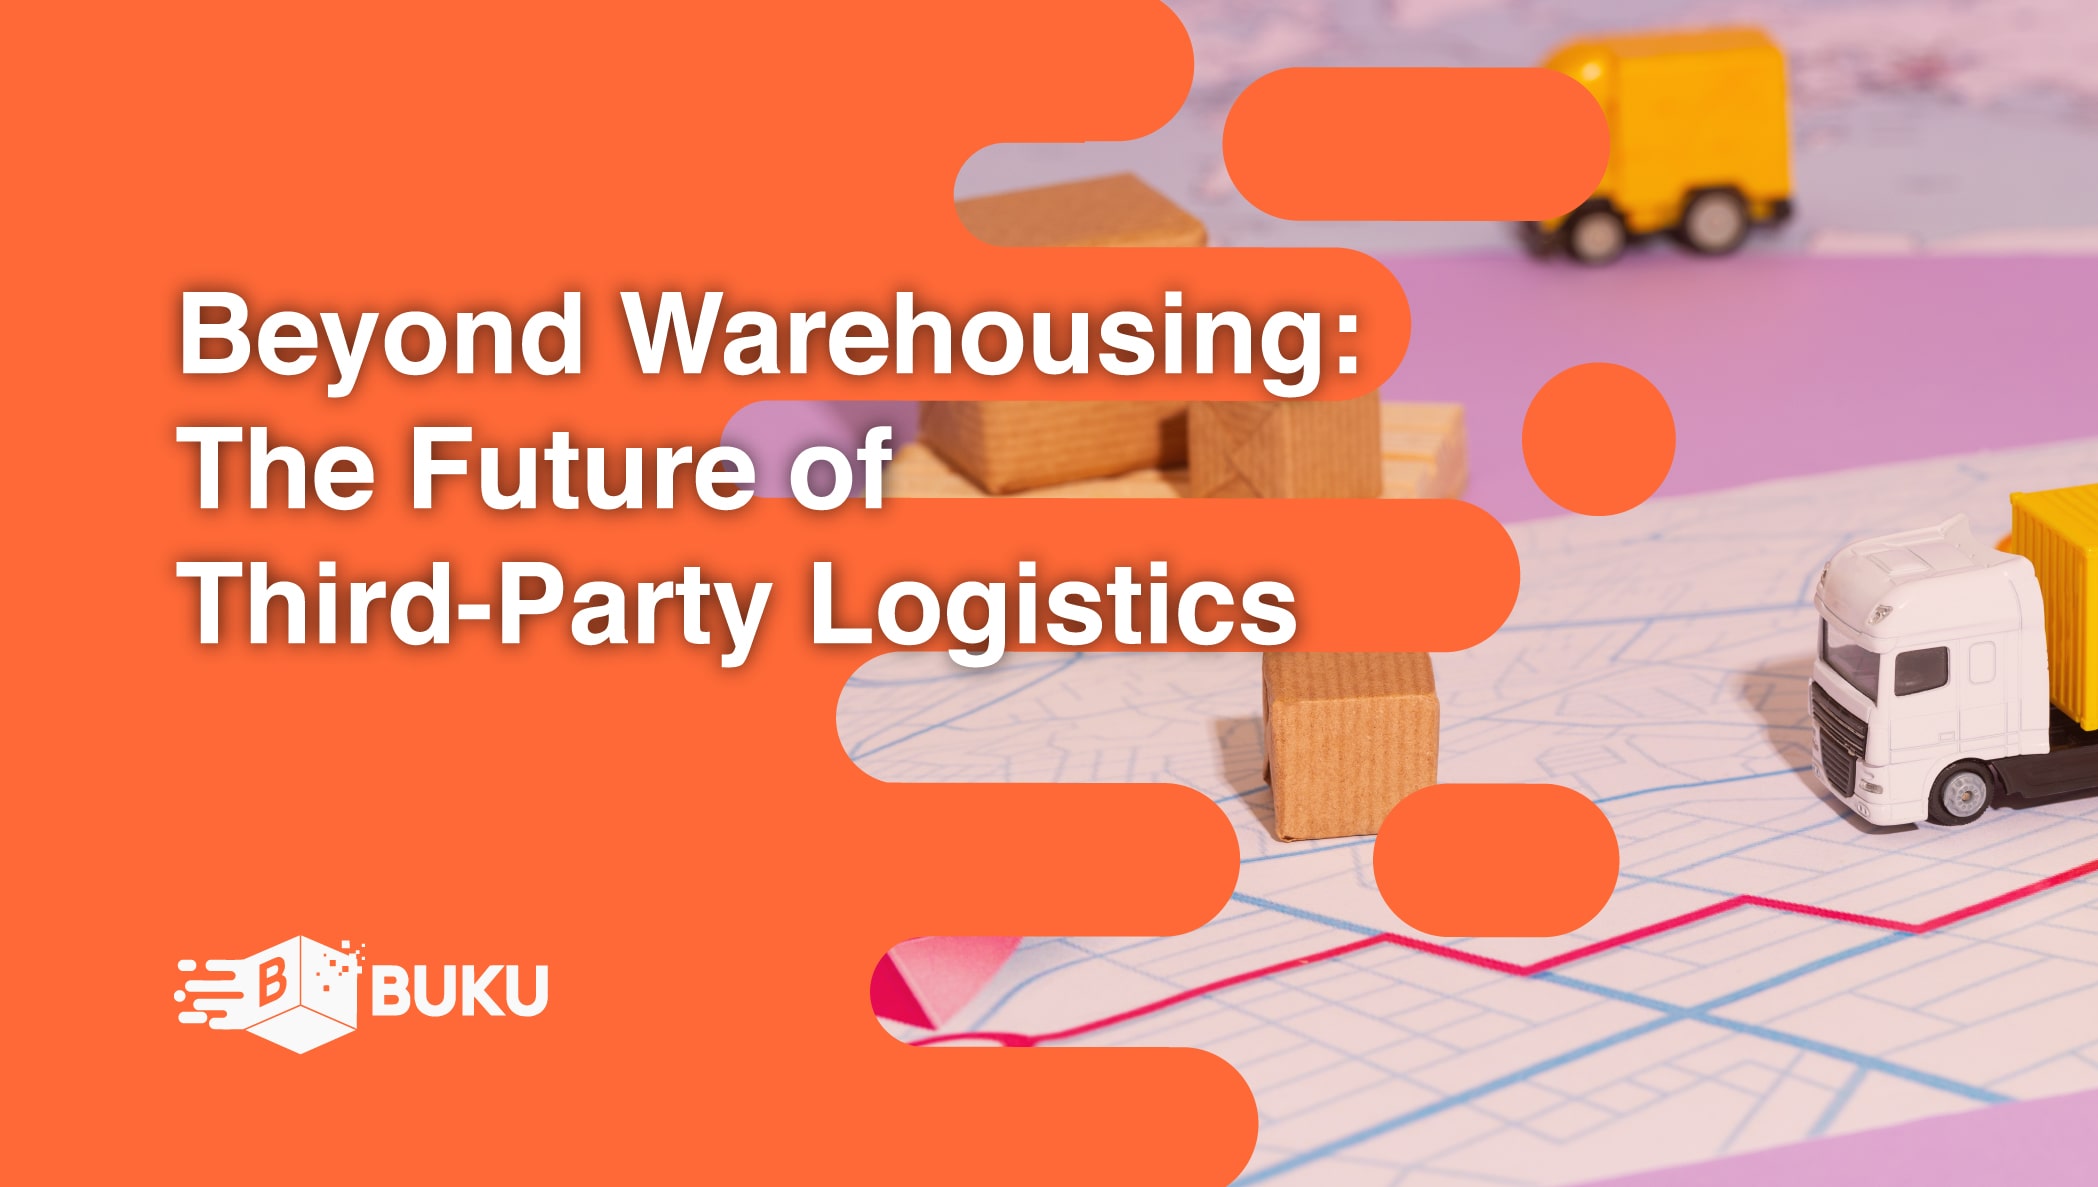 Beyond Warehousing: The Future of Third-Party Logistics